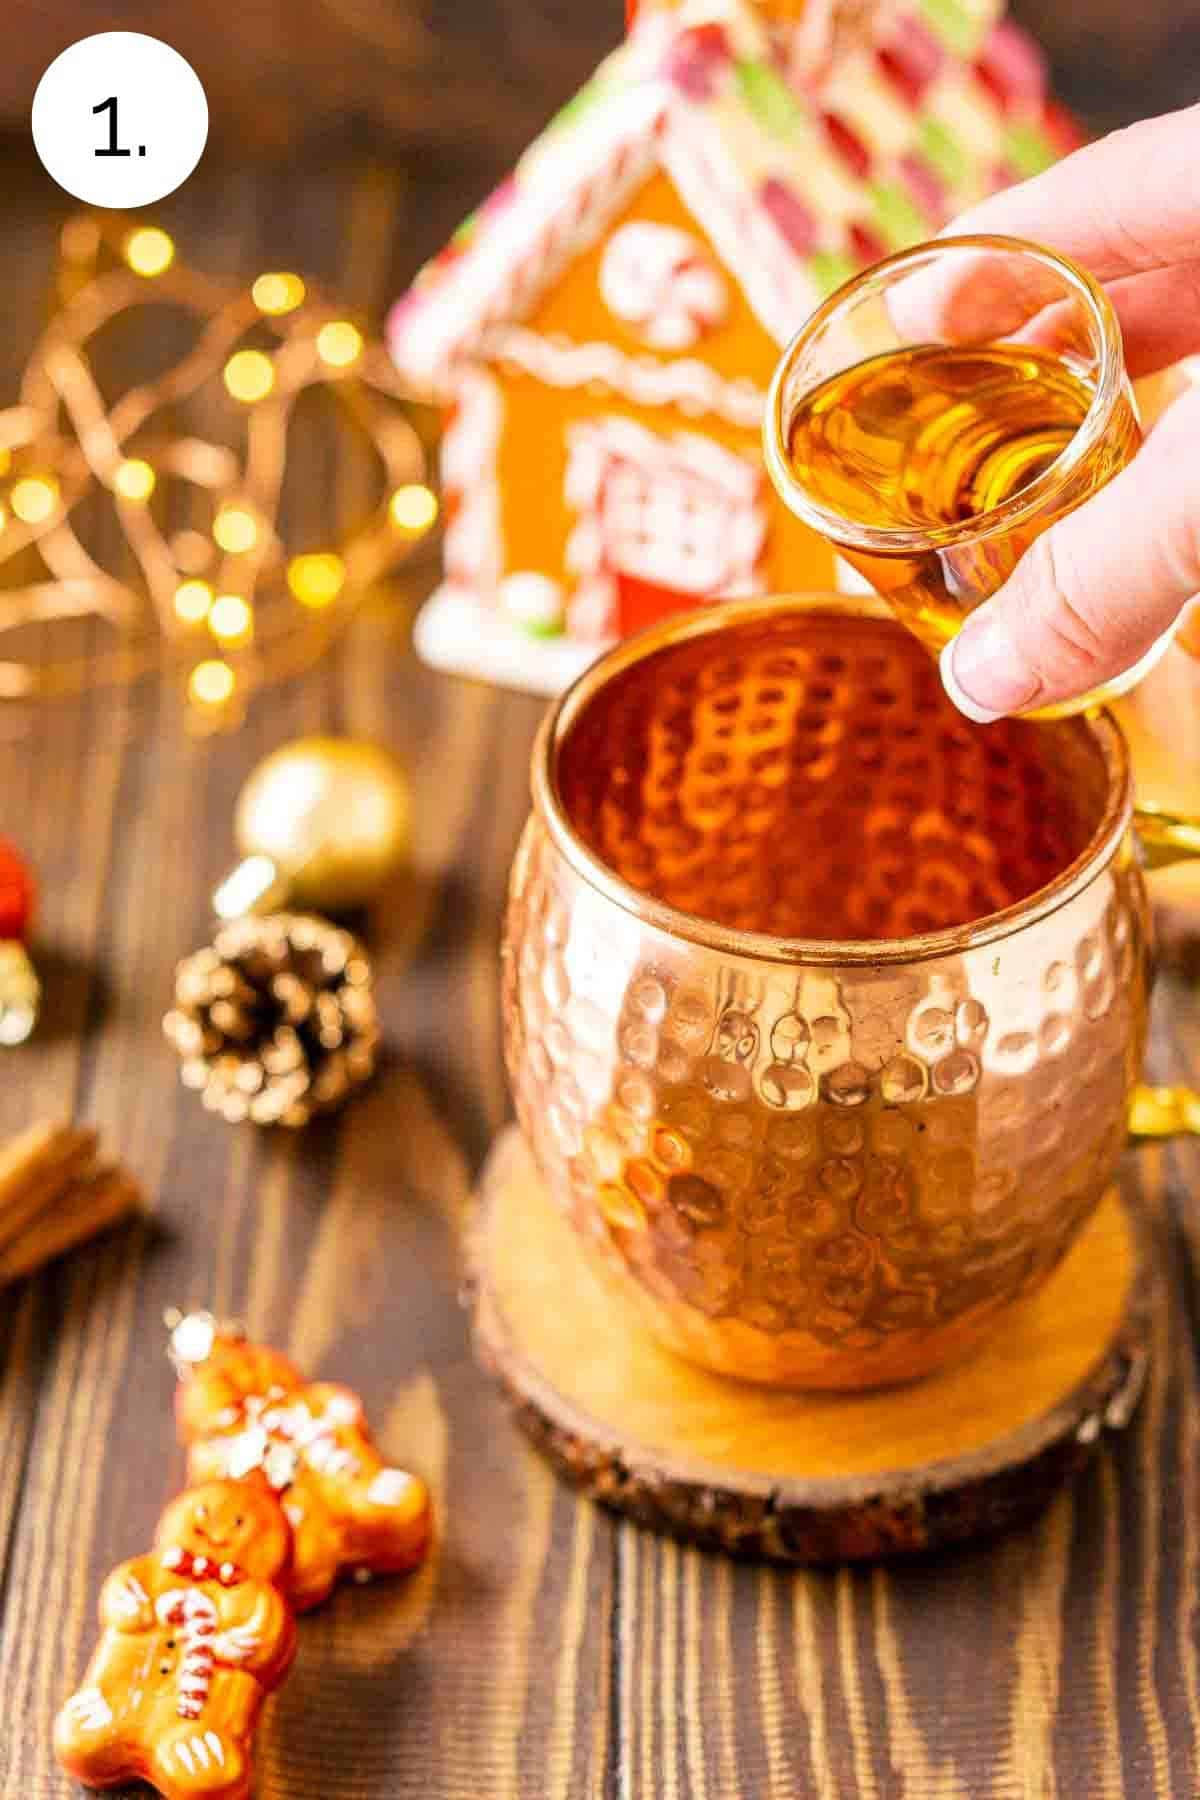 A hand pouring in a shot of bourbon into the copper mug with holiday decor all around.